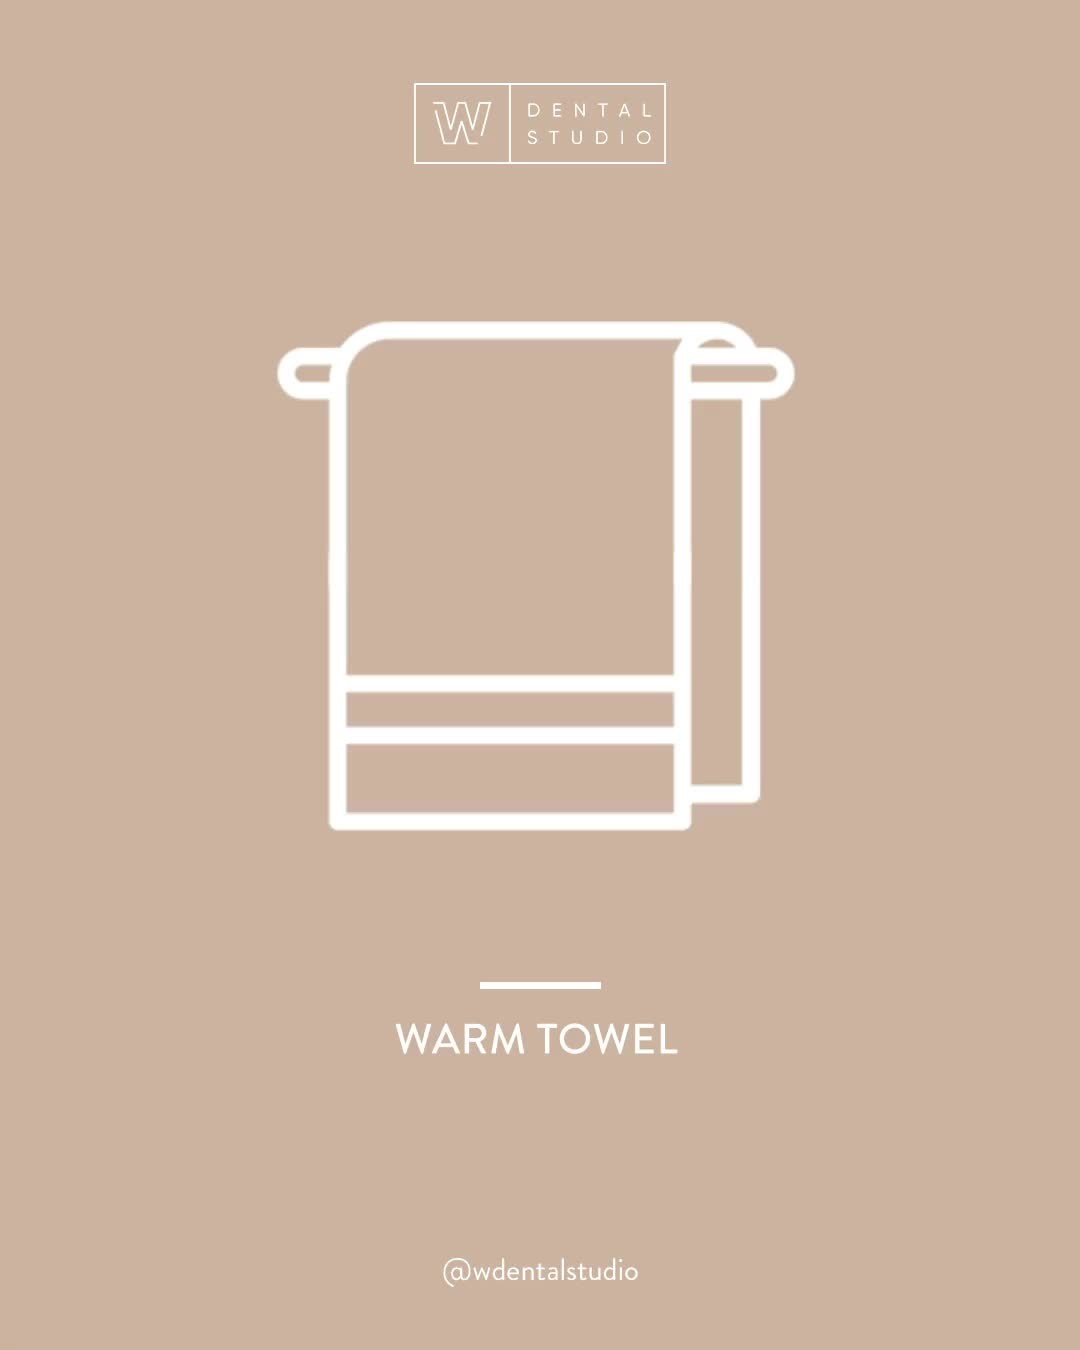 Take a warm towel to clean and refresh during or after your appointment! ✨

📞 613-564-3300
📍 270 Richmond Rd, Ottawa, ON
💻 https://www.wdentalstudio.com
📧 info@wdentalstudio.com